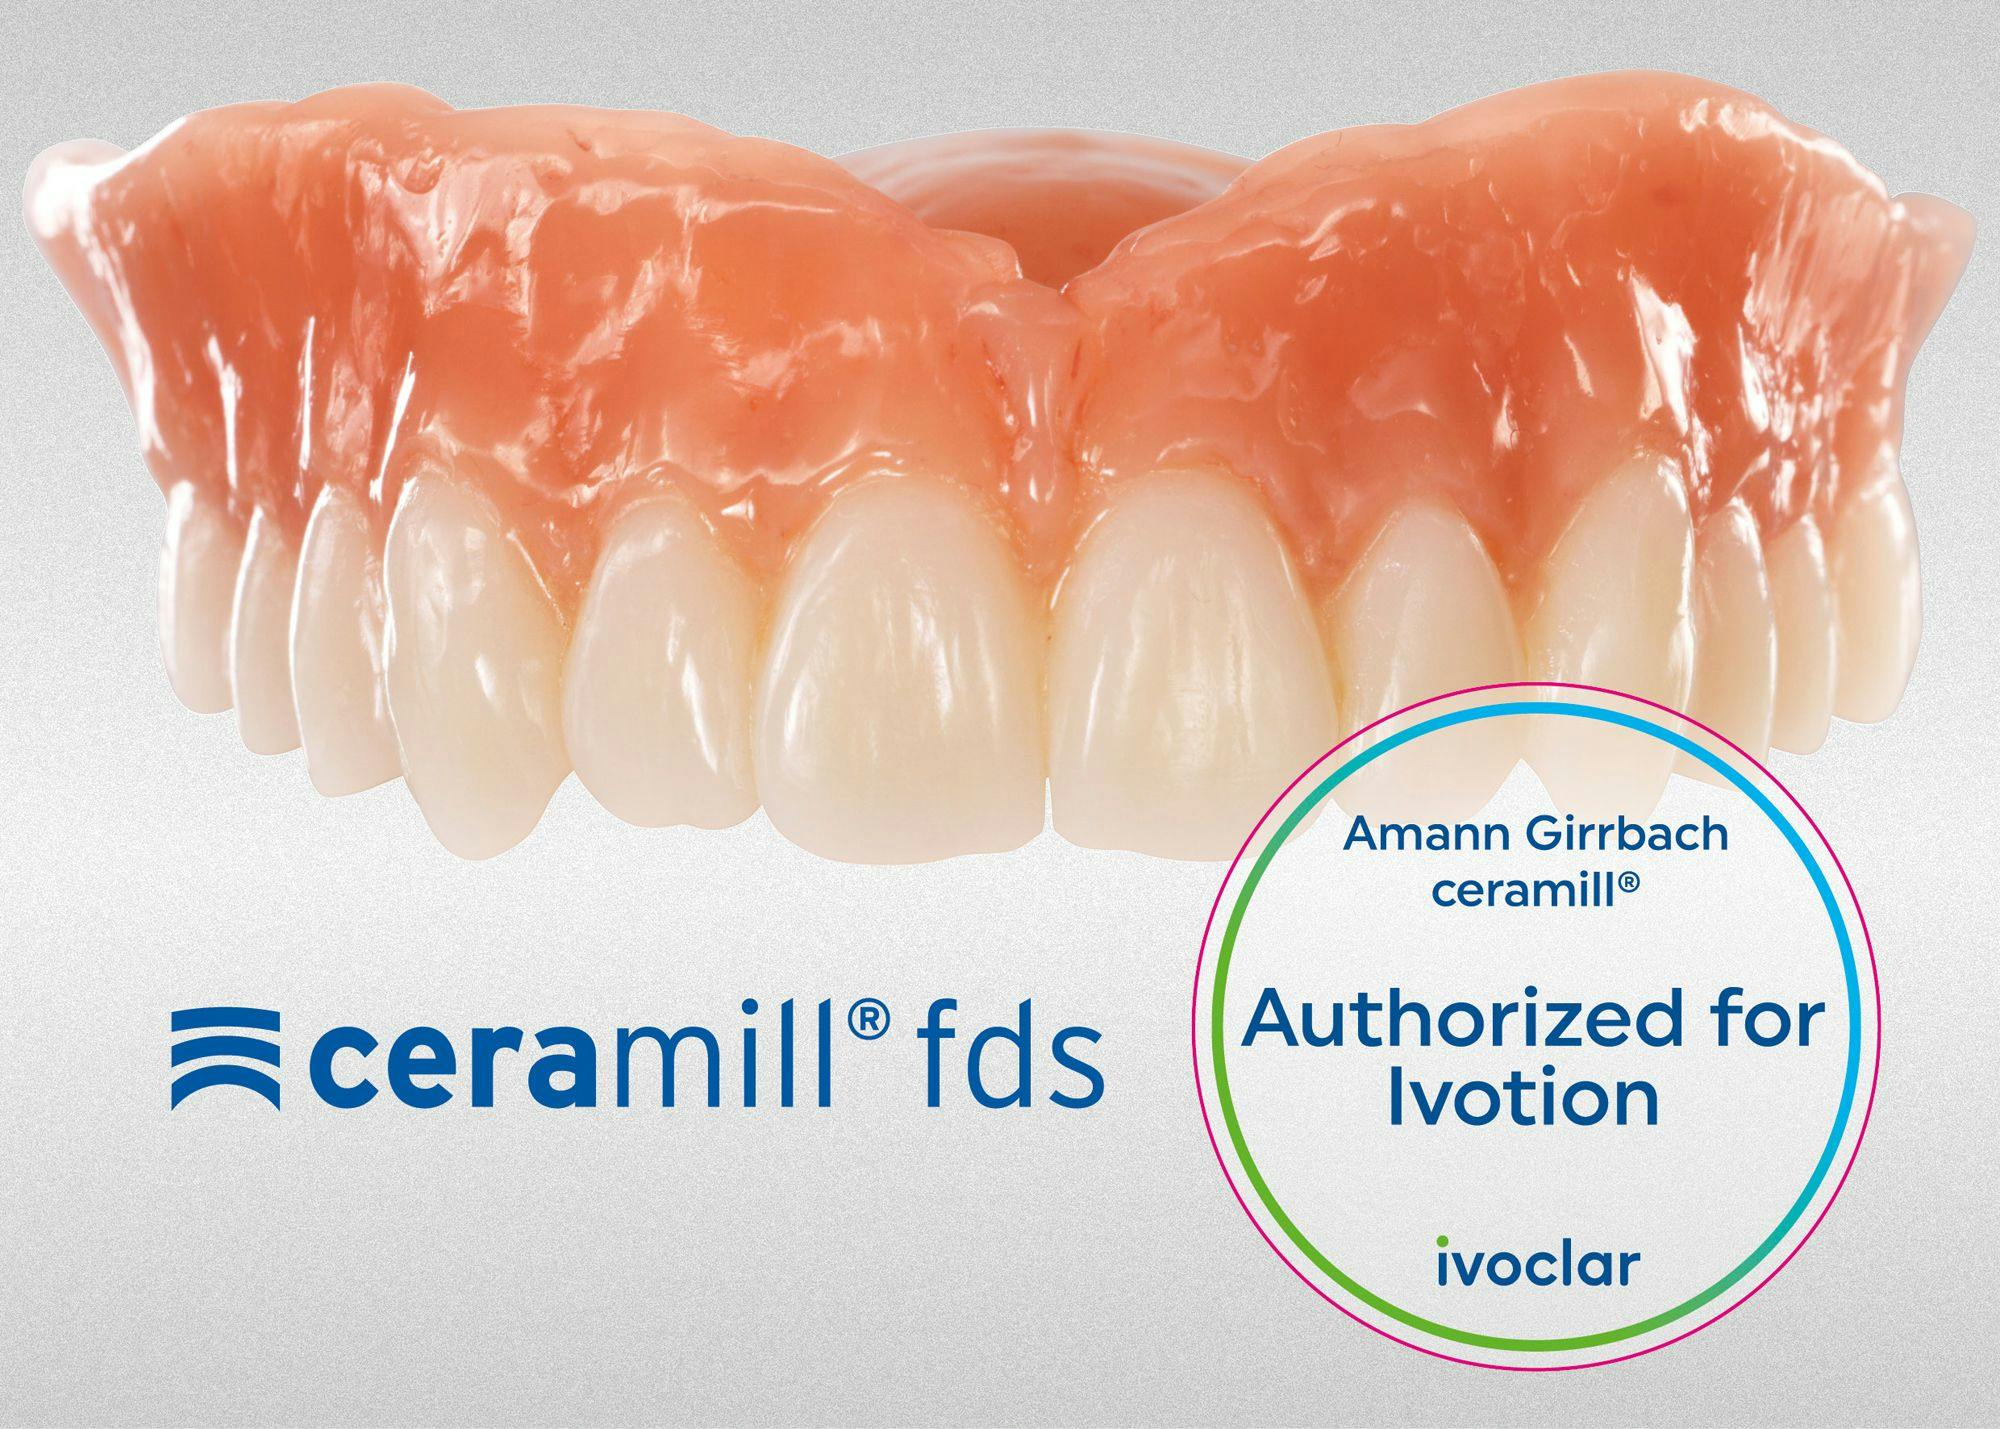 Amann Girrbach Expands Ceramill Full Denture System for Validated Ivotion Materials